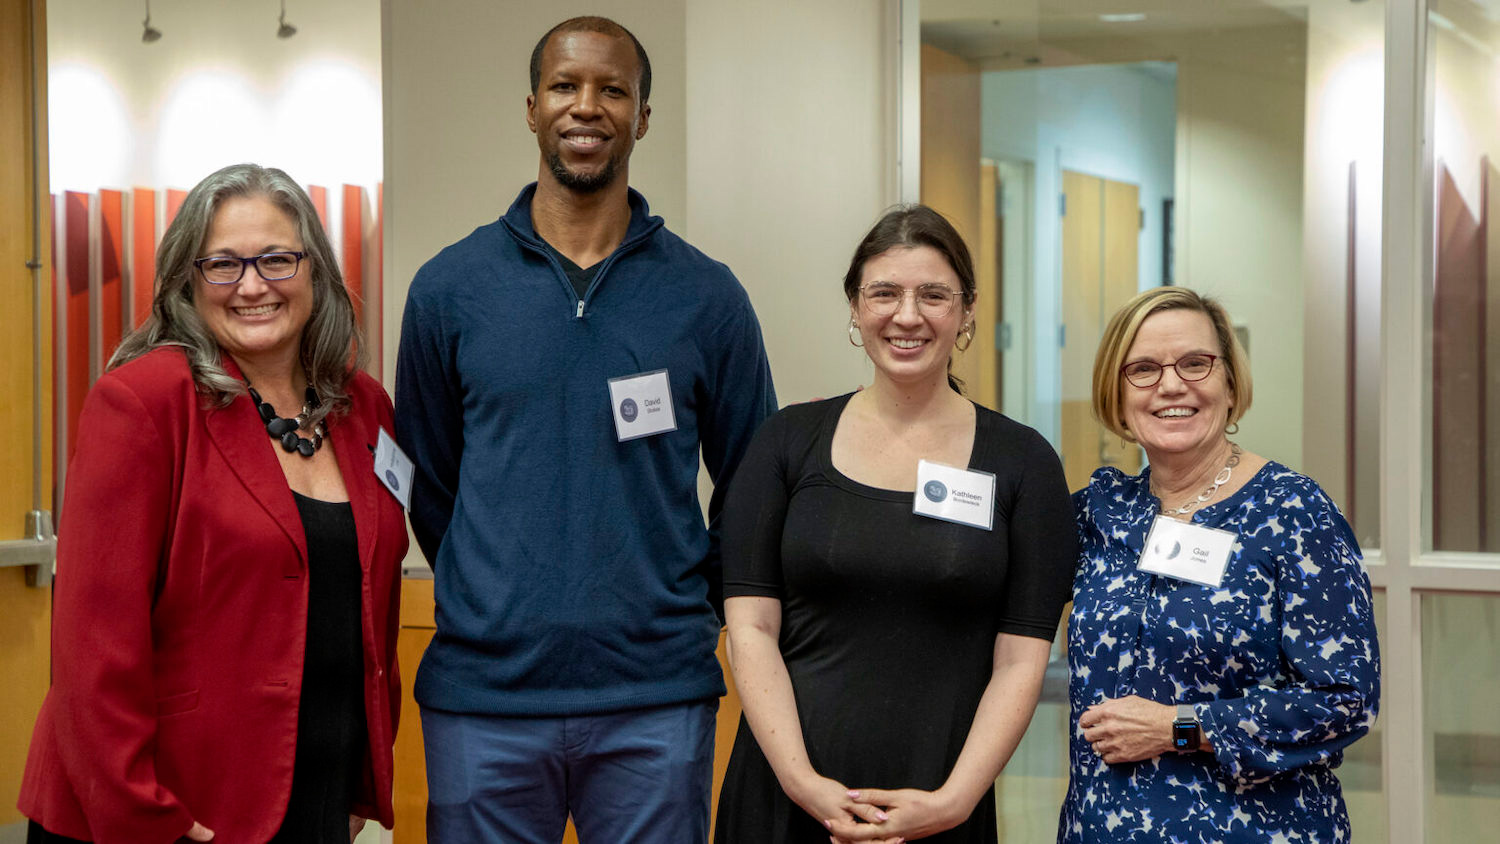 Friday Institute Graduate Student Fellows David Stokes and Kat Bordewieck with their advisers, Hollylynne Lee and Gail Jones.